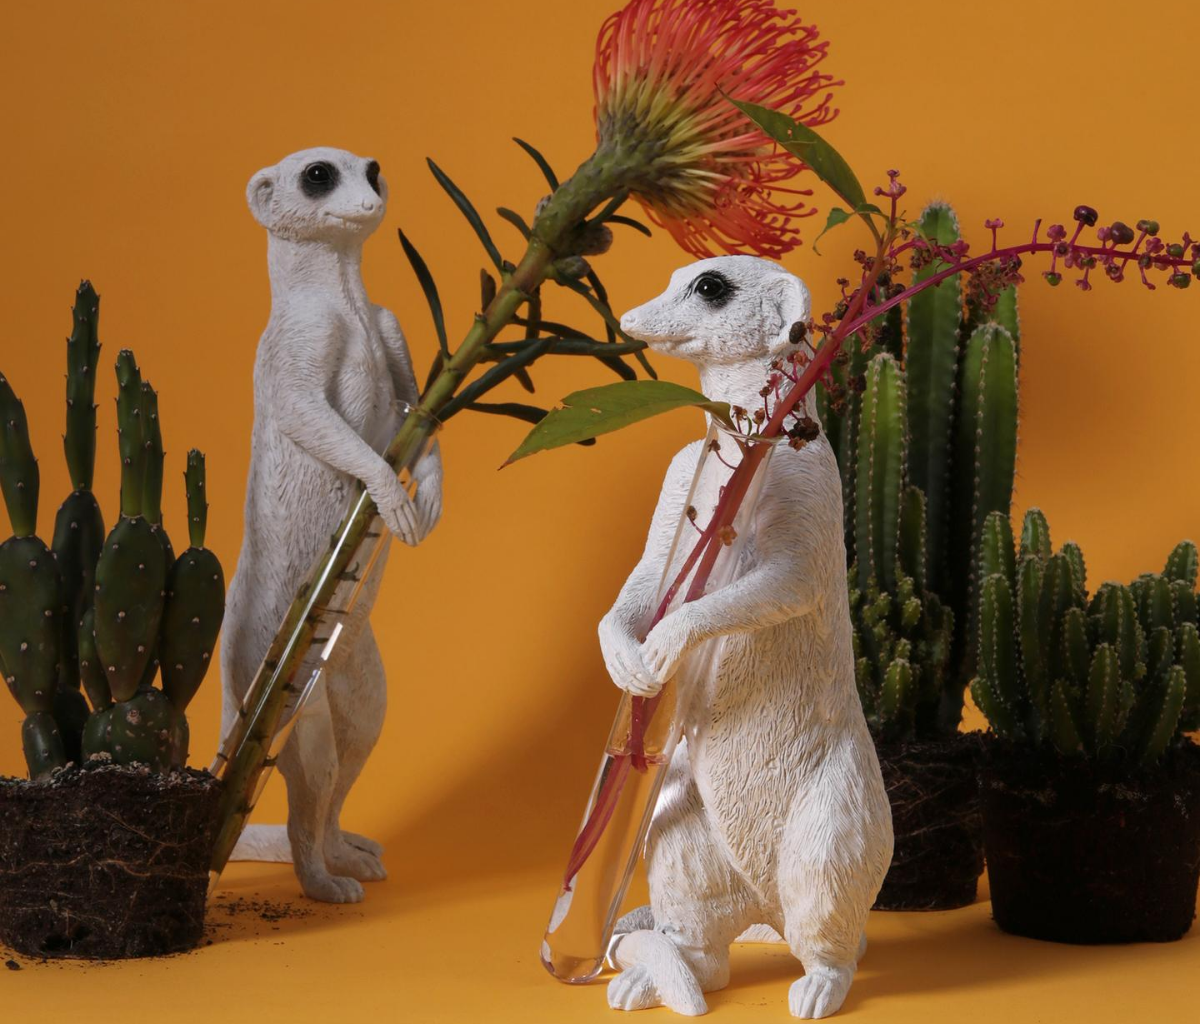 What should you take as meerkat ornaments for the garden? - Here It is